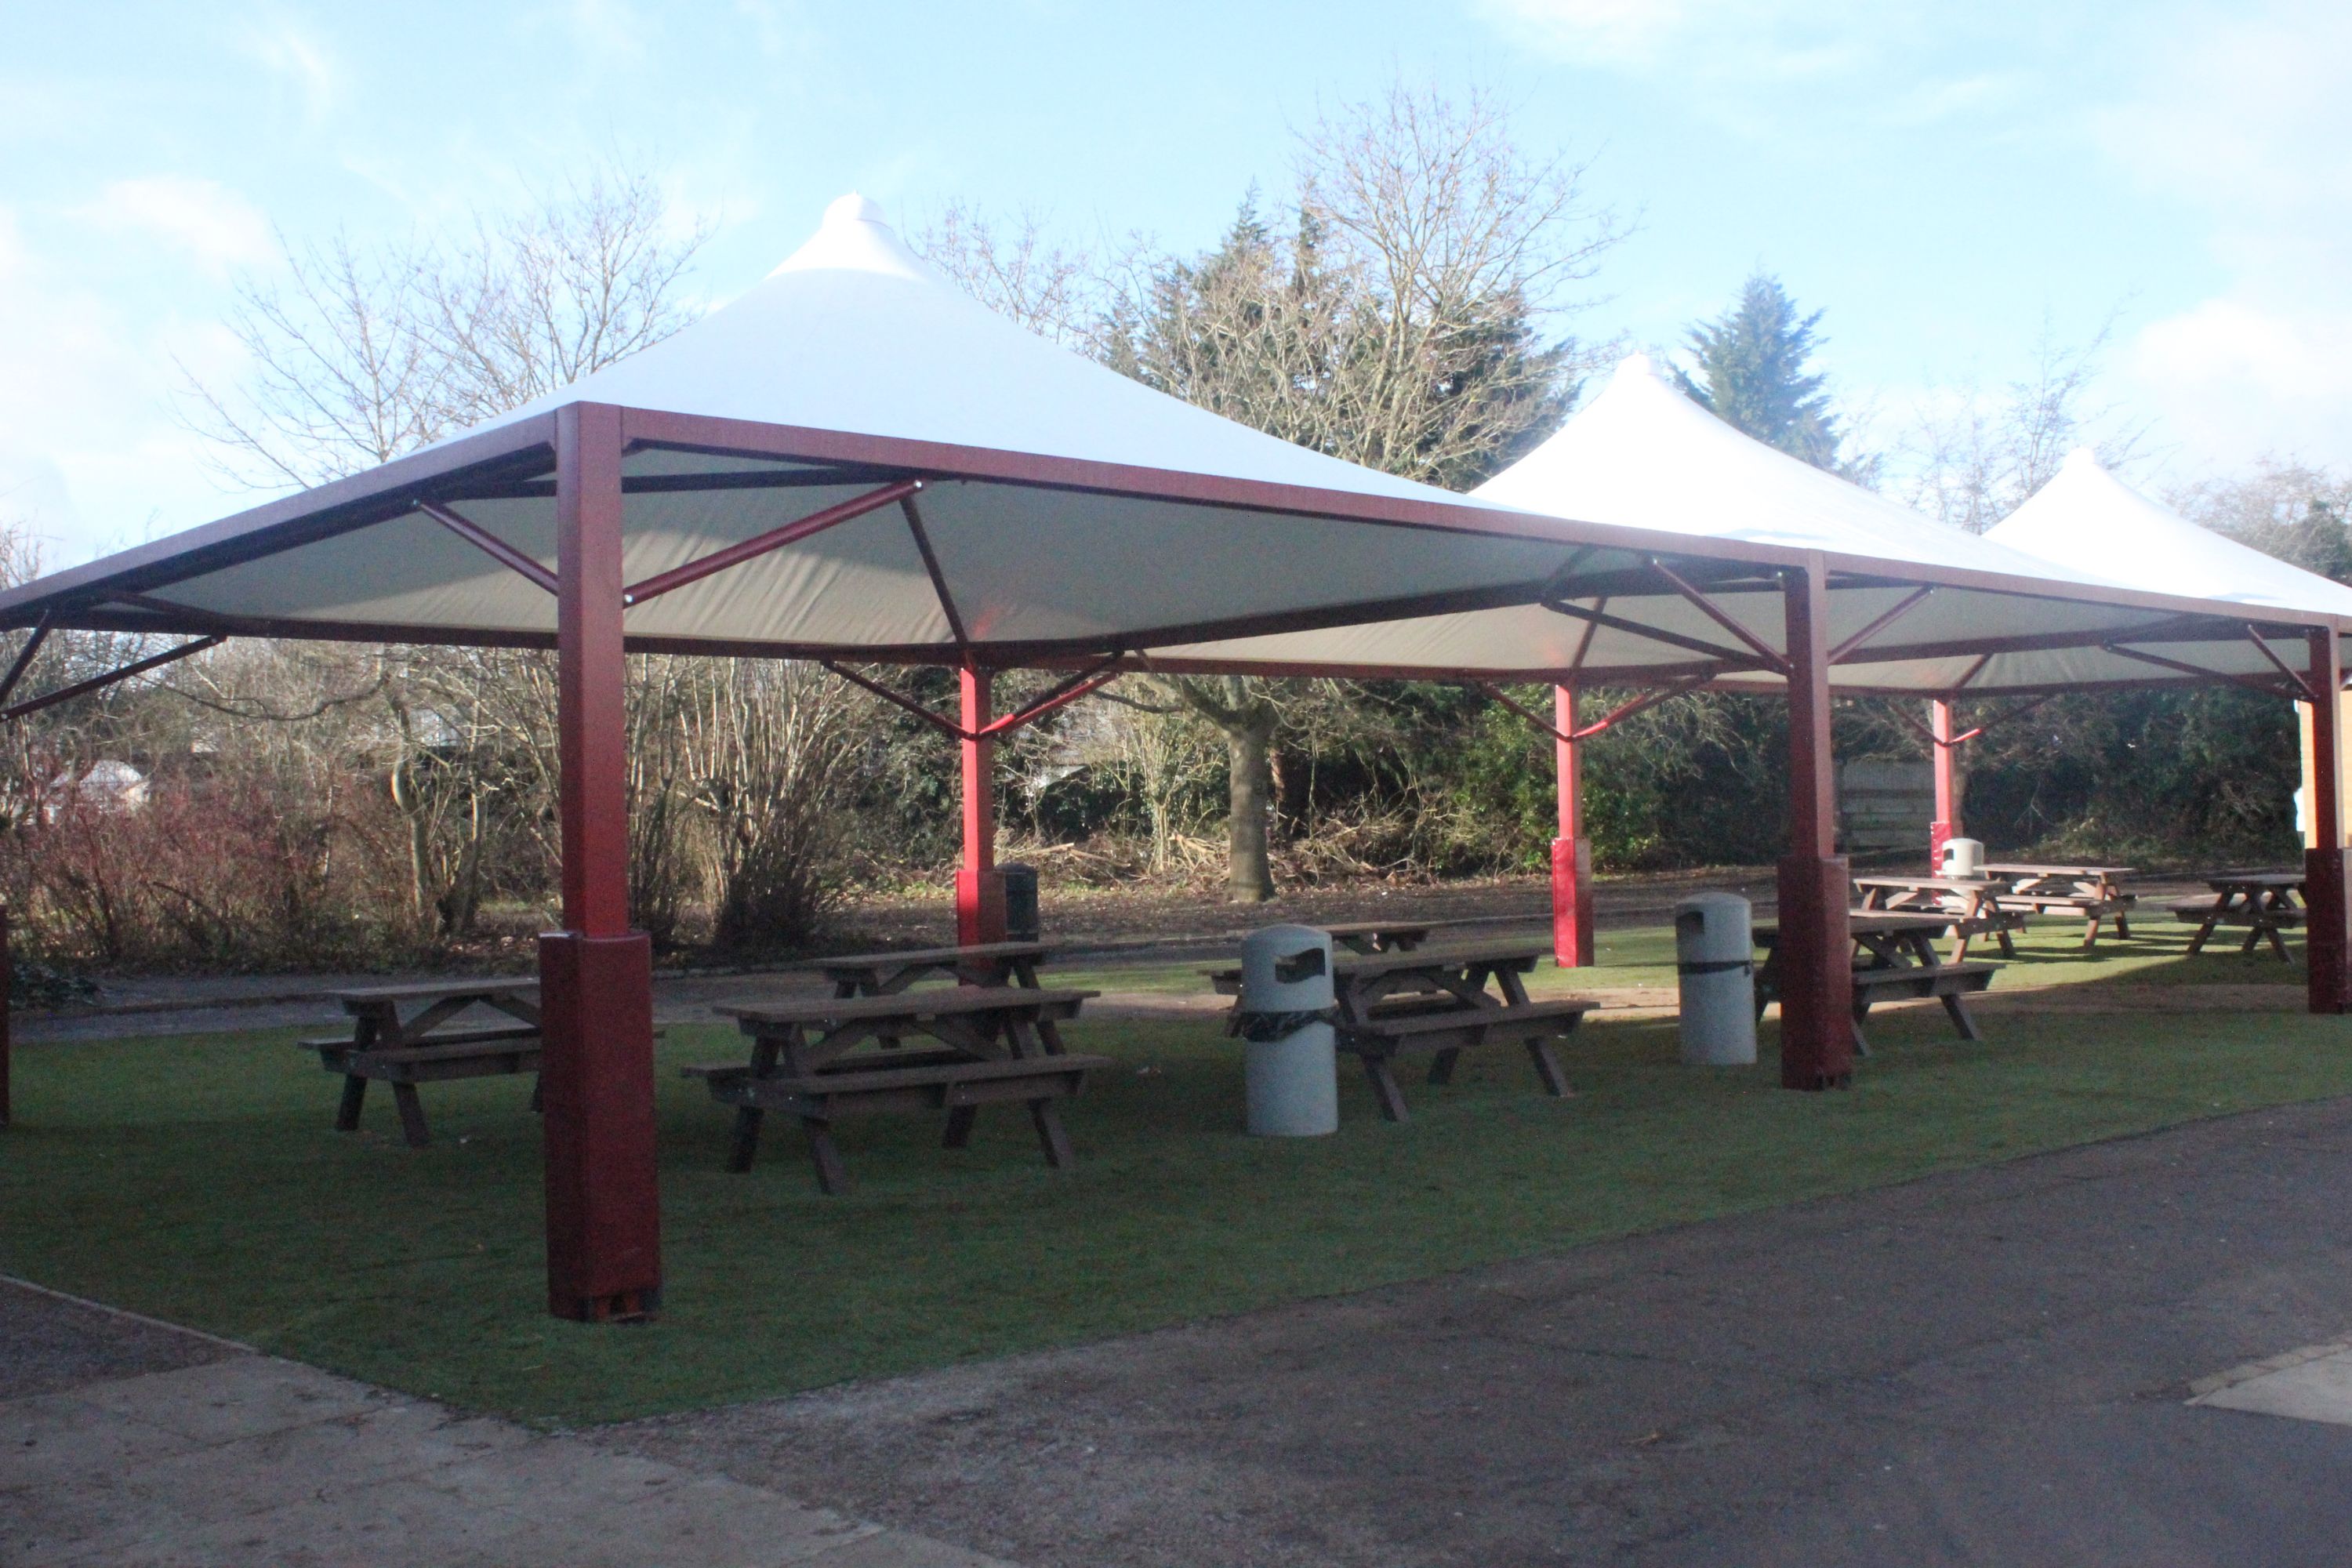 Covered canopy area